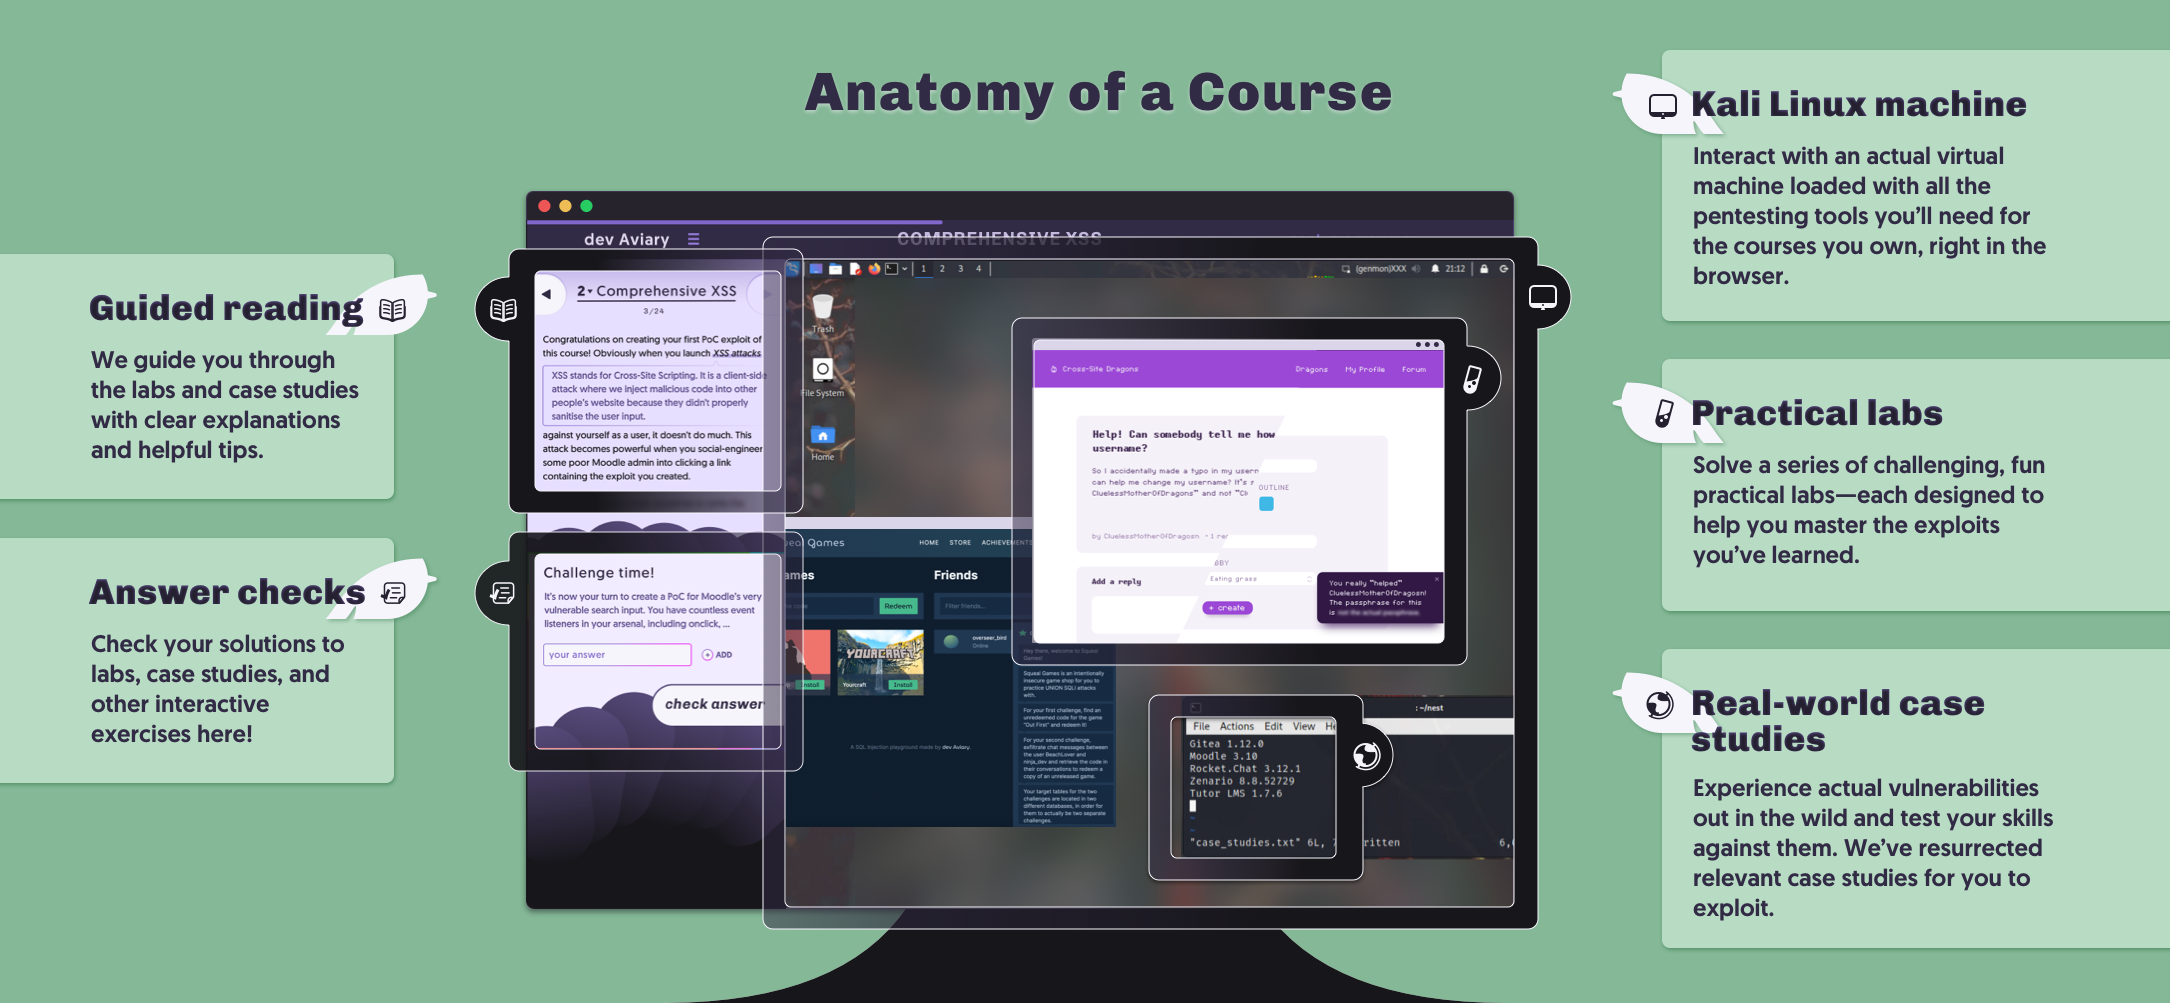 Anatomy of a course